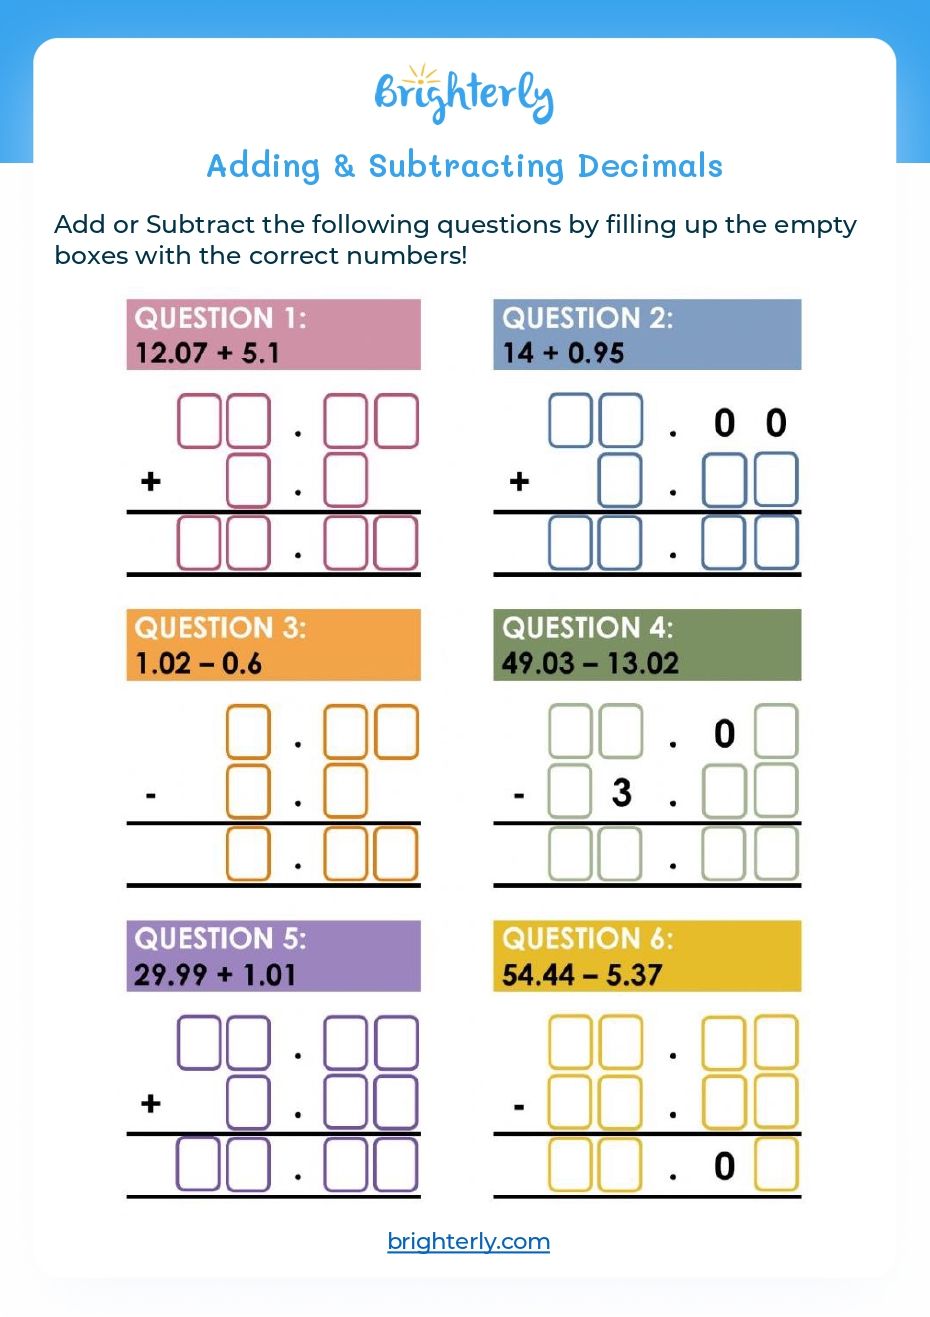 free-adding-and-subtracting-decimals-worksheets-pdfs-brighterly